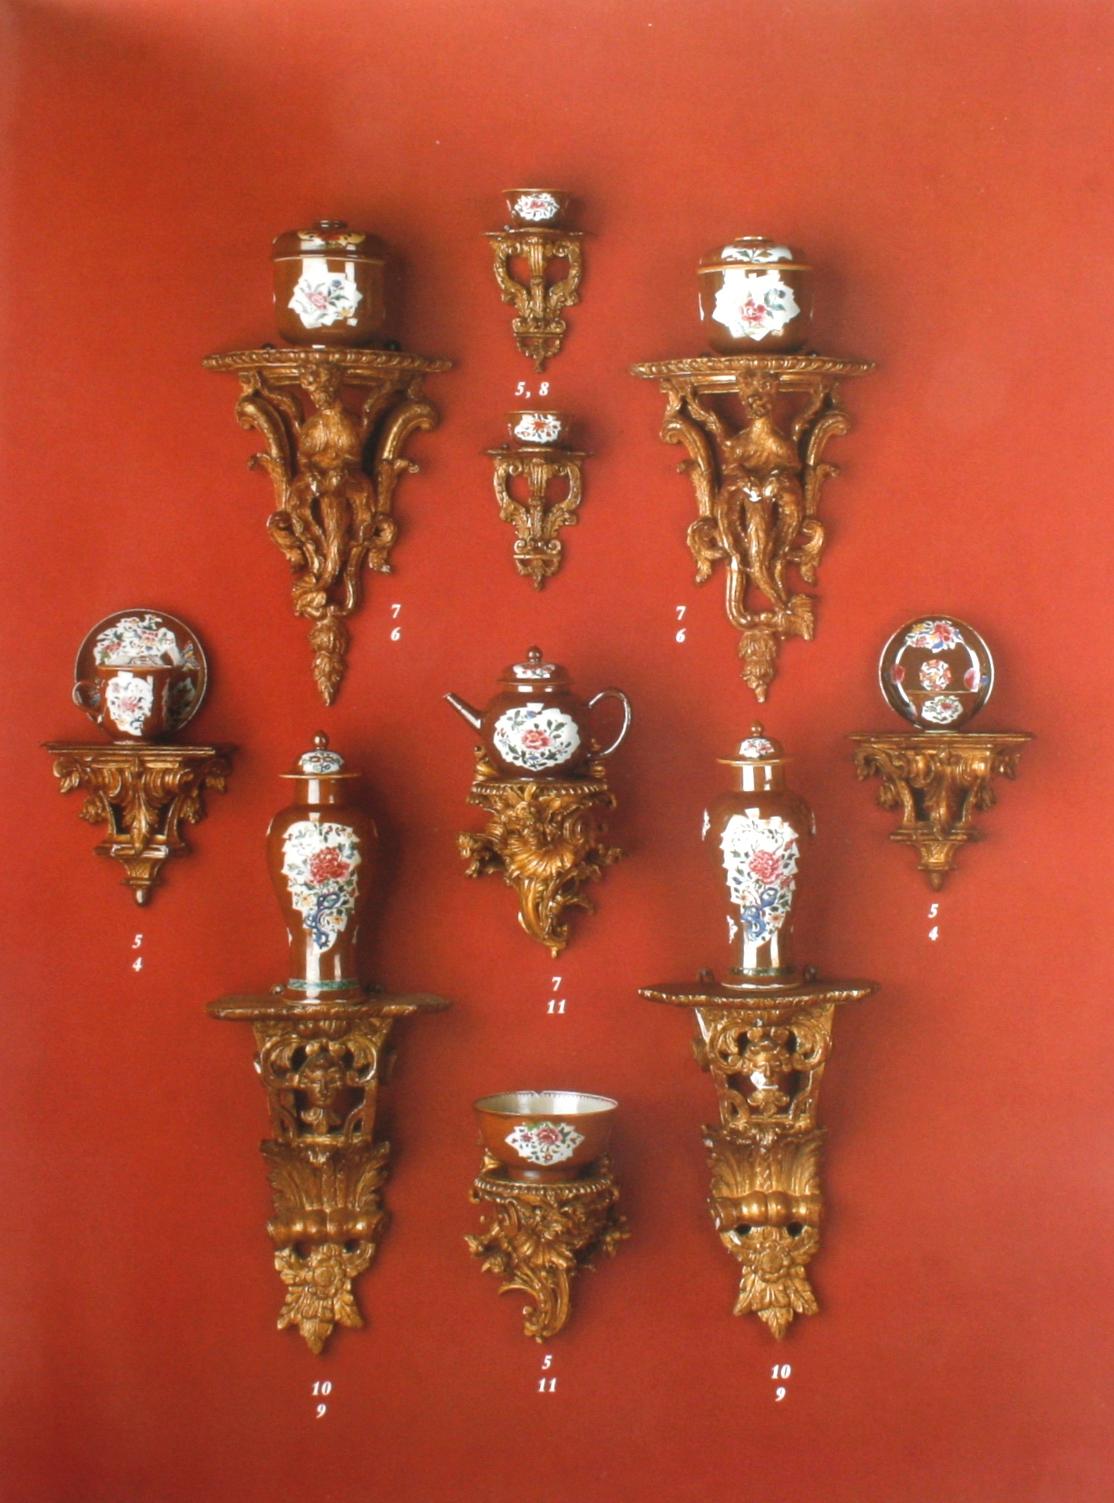 Christie's: Works of Art from the Espirito Santo Collection London 12/12/96 Sale #5729. Softcover catalog of 96 pages with 126 lots. Fine French Furniture, Old Masters, Porcelain, Carpets and Clocks. Portugal’s Espírito Santo family spent decades